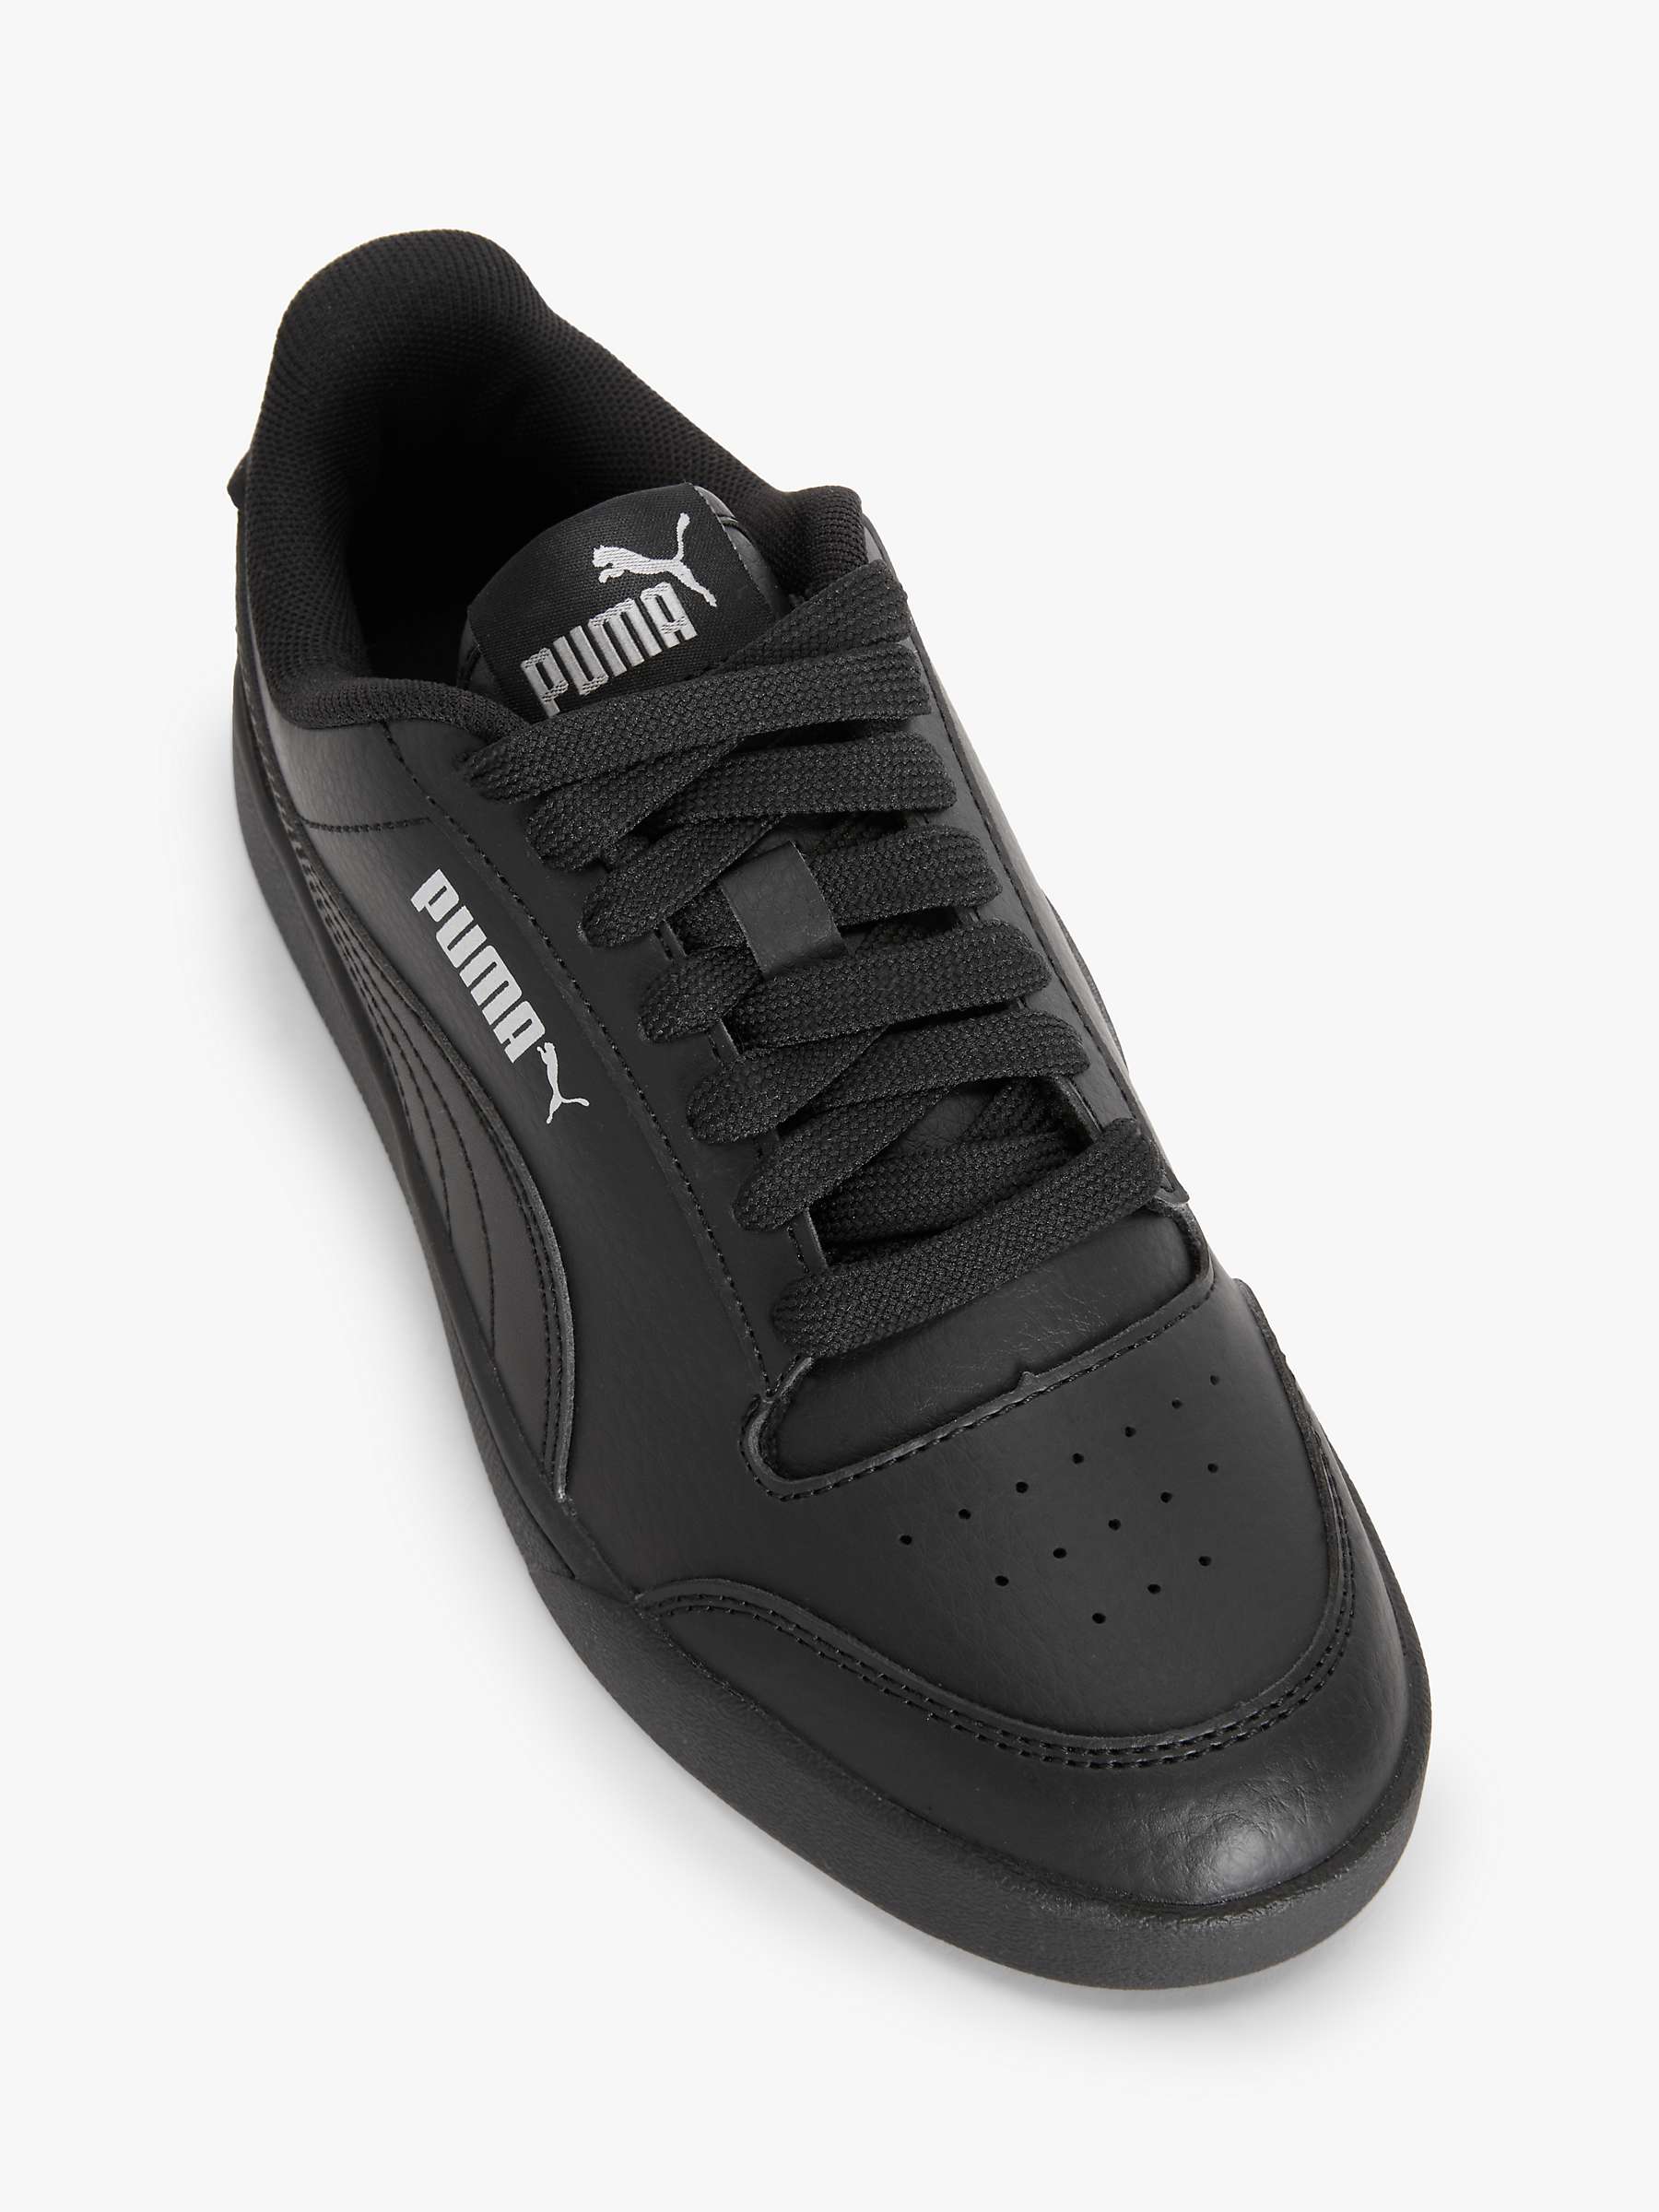 Buy PUMA Kids' Shuffle Trainers Online at johnlewis.com